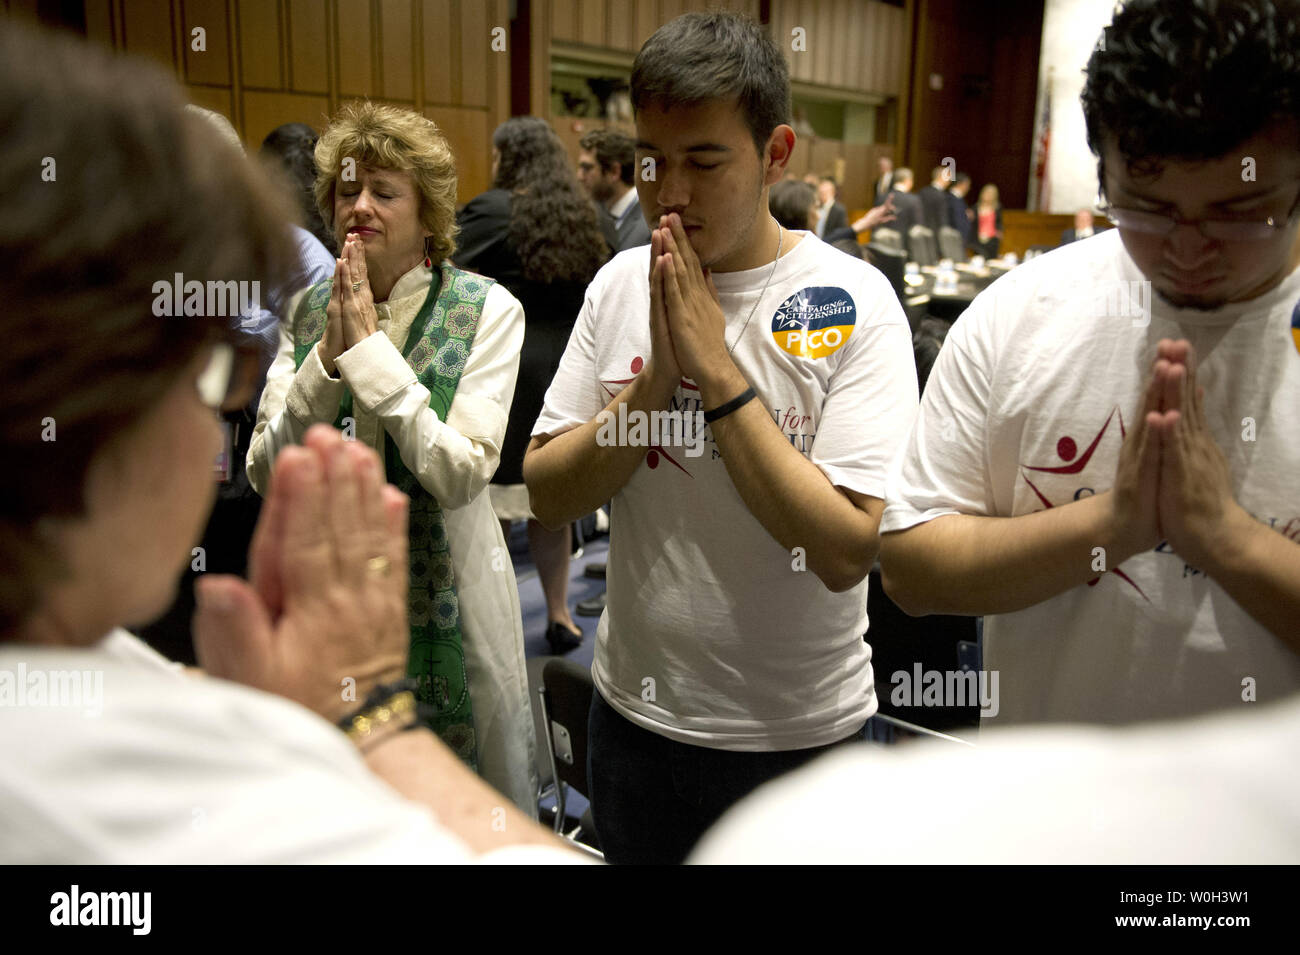 Members of the pro-immigration reform group Campaign for Citizenship hold a prayer vigil prior to the Senate Judiciary Committee mark-up of the Immigration Reform Bill, on Capitol Hill on May 9, 2013 in Washington, D.C.  UPI/Kevin Dietsch Stock Photo